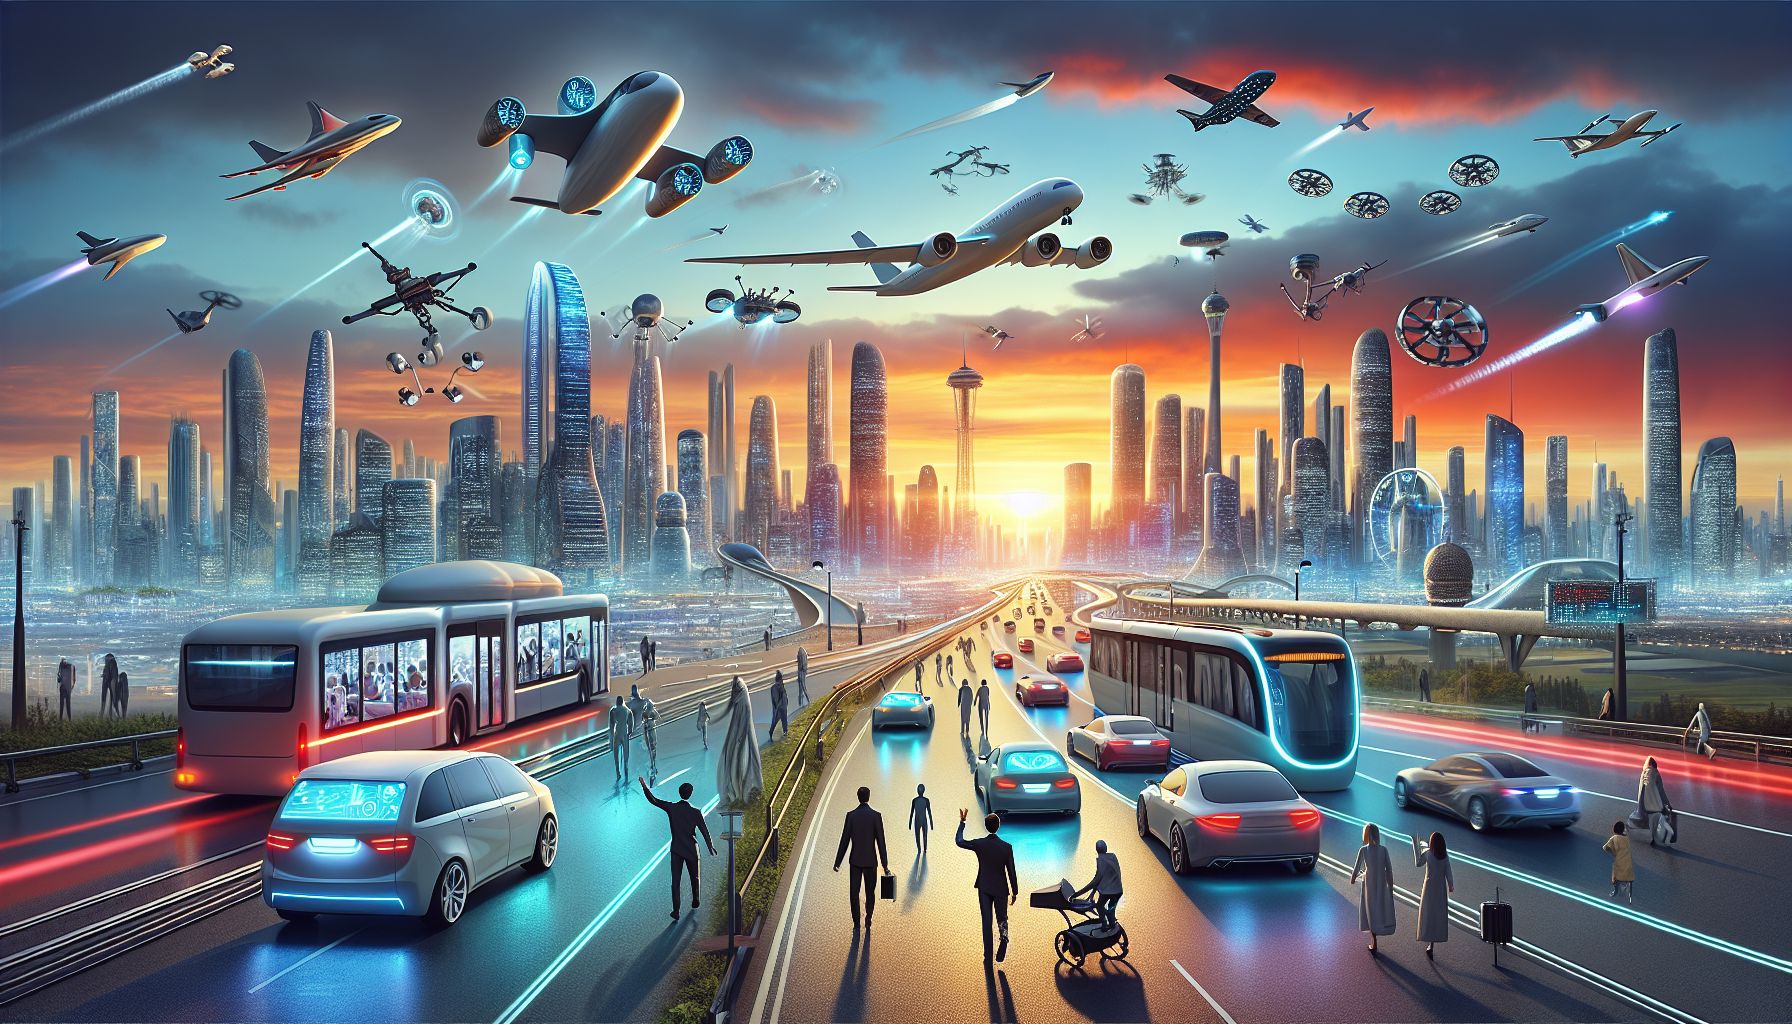 Soaring into the Future: Traveling in the Age of Technology